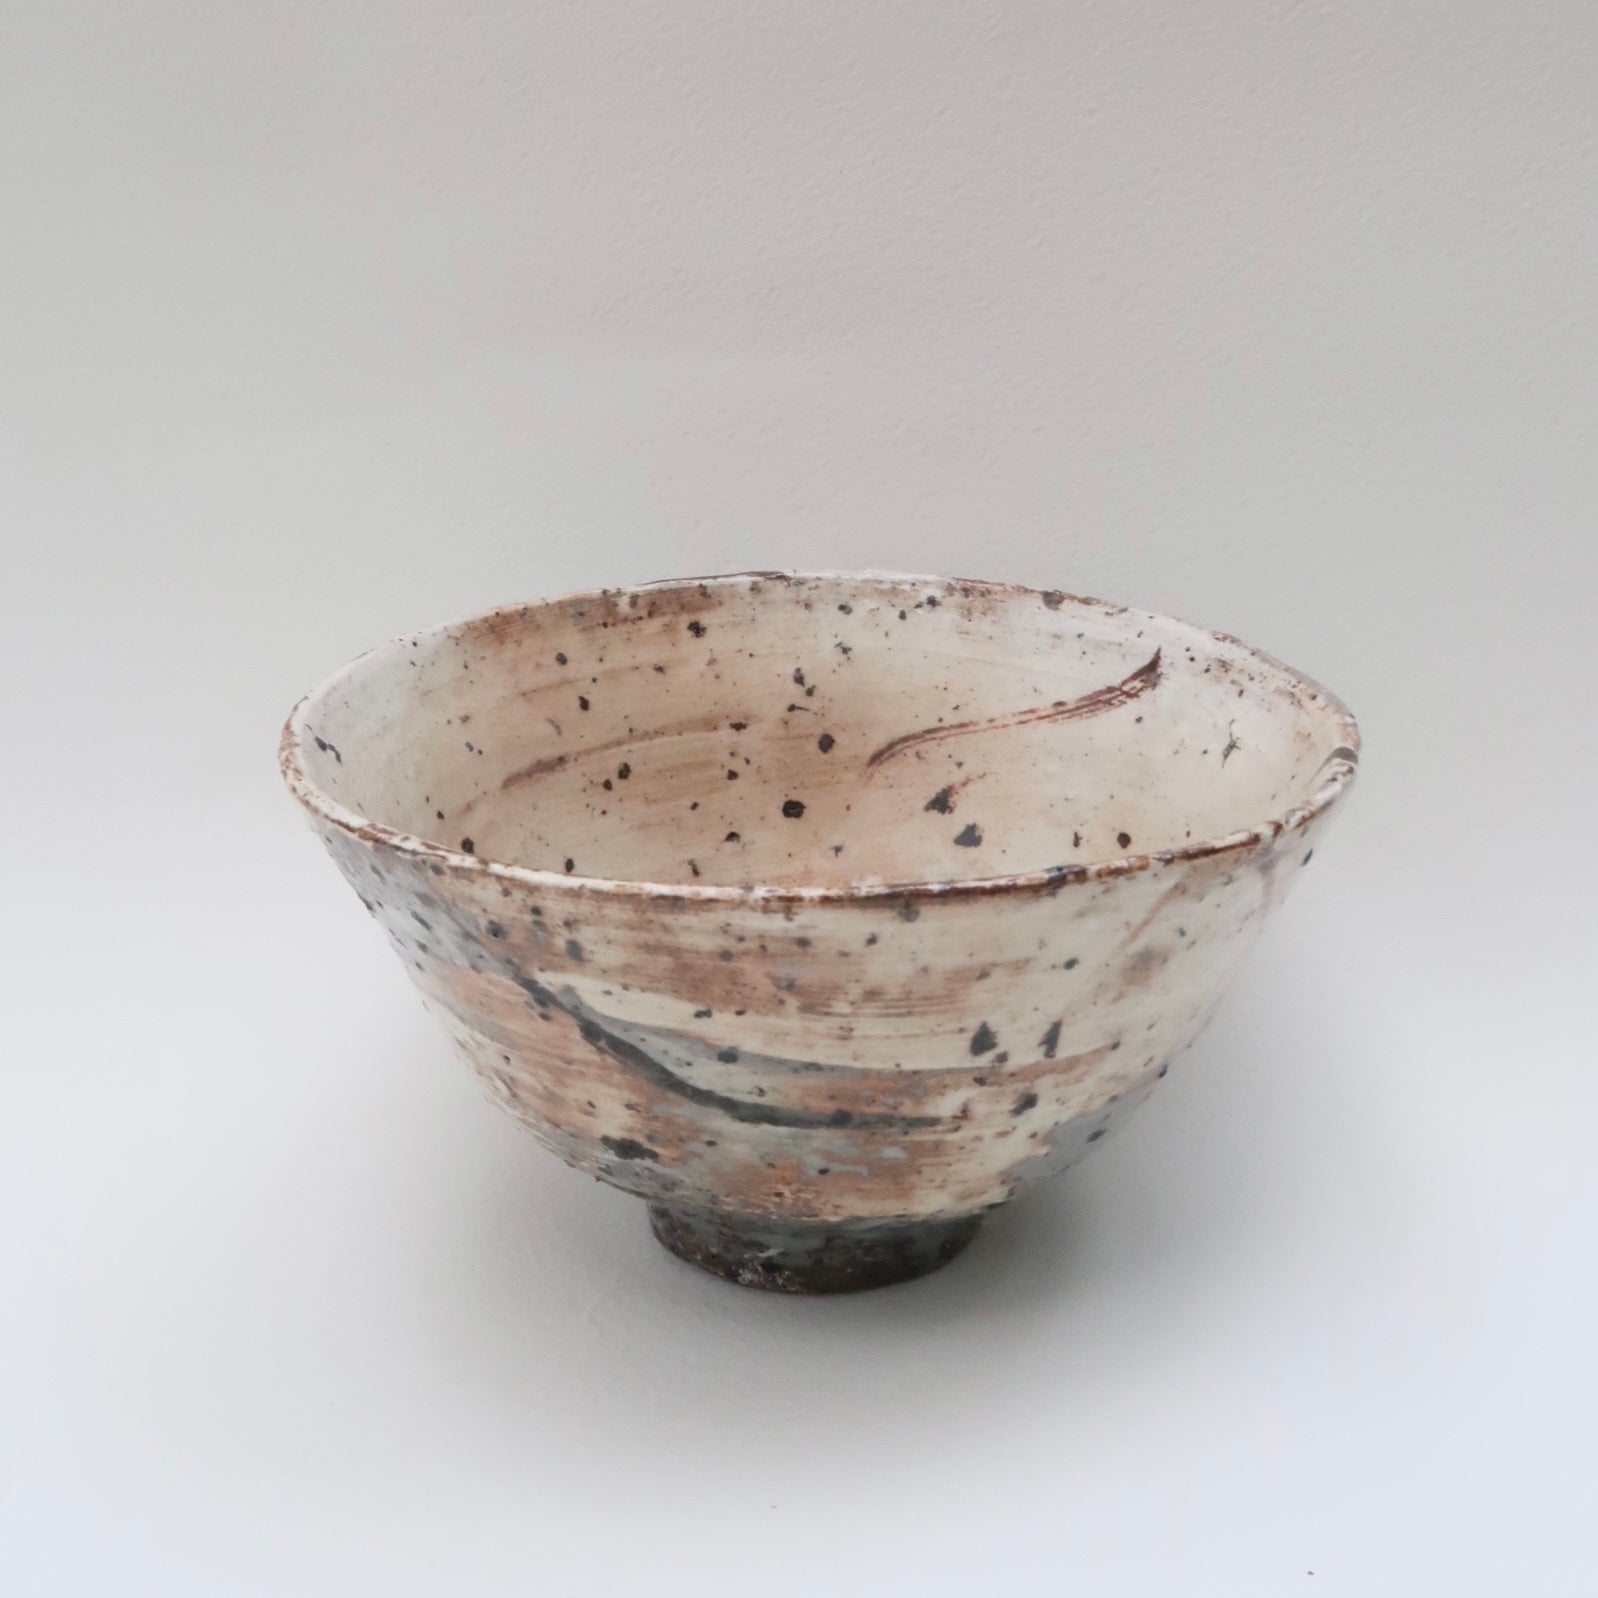 Buncheong Tea Bowl with Brushed White-slip